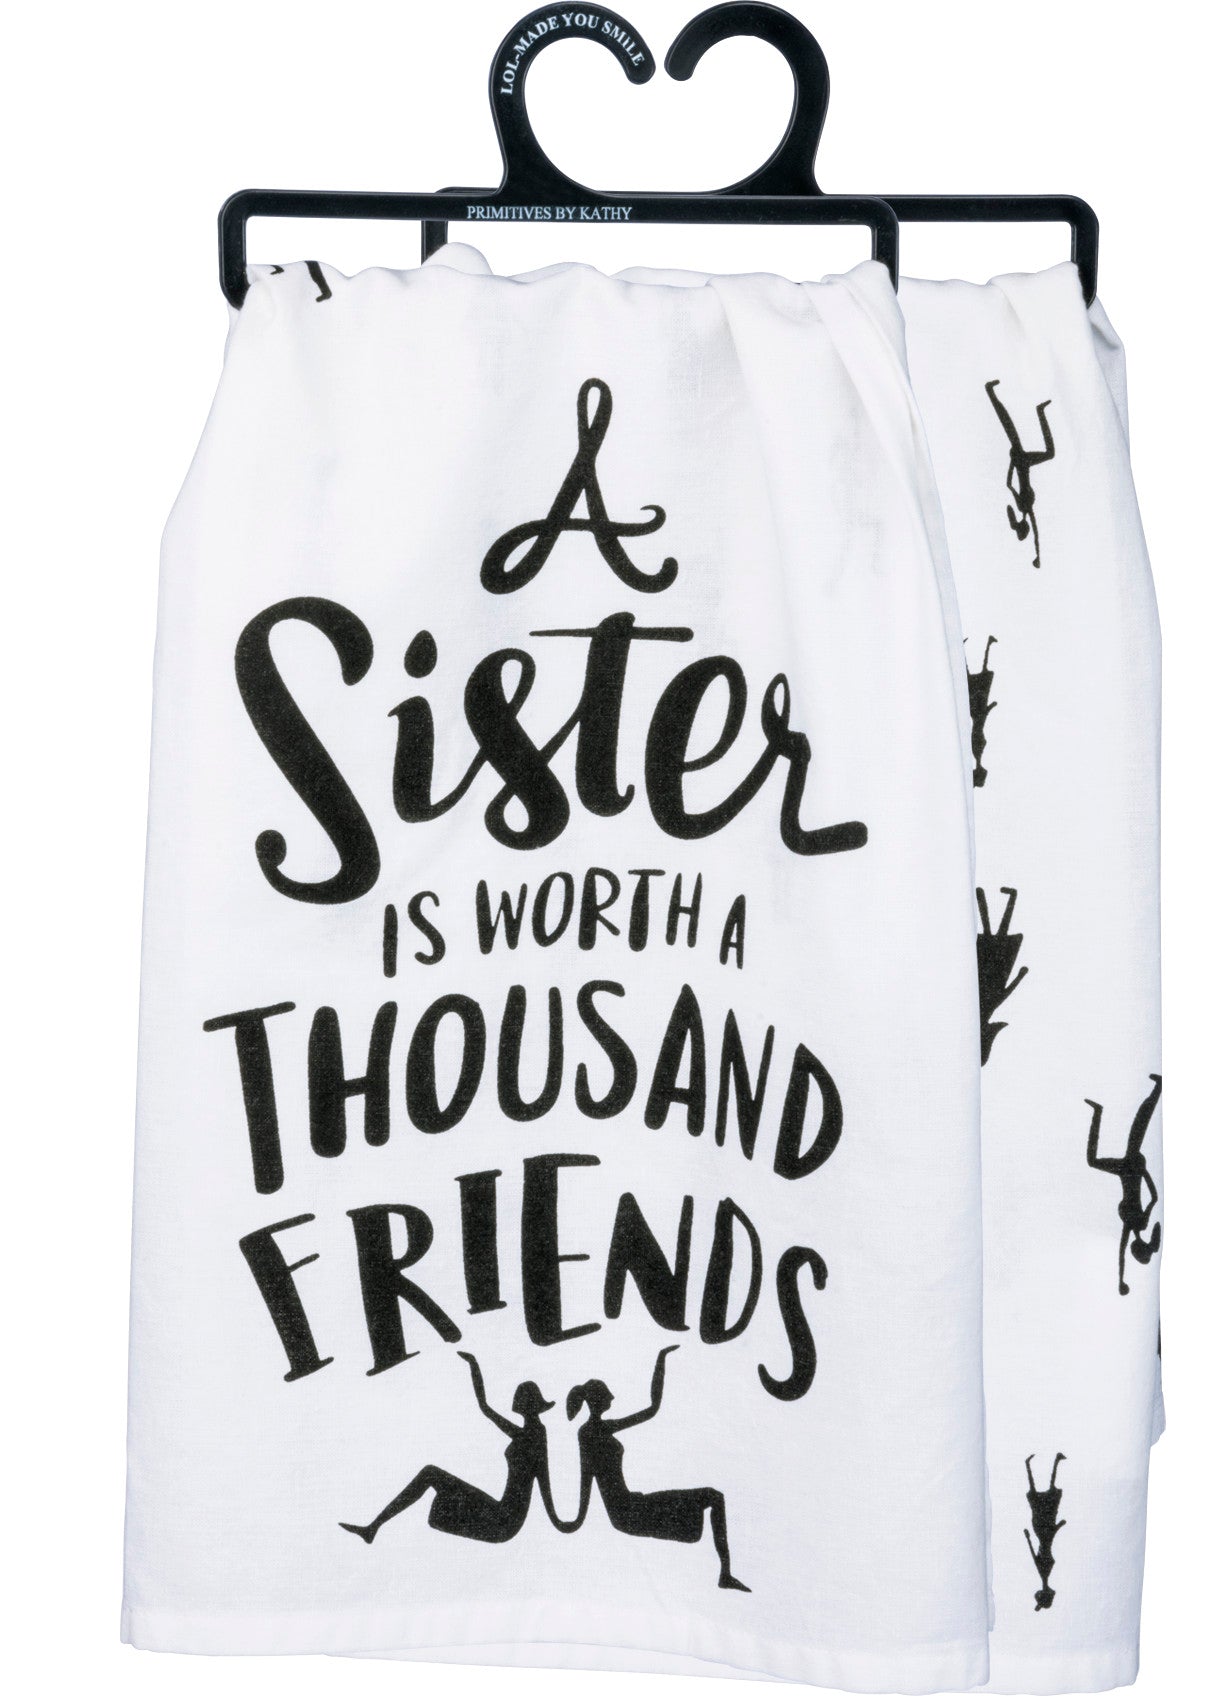 Dish Towel-“A Sister is Worth A Thousand Friends”